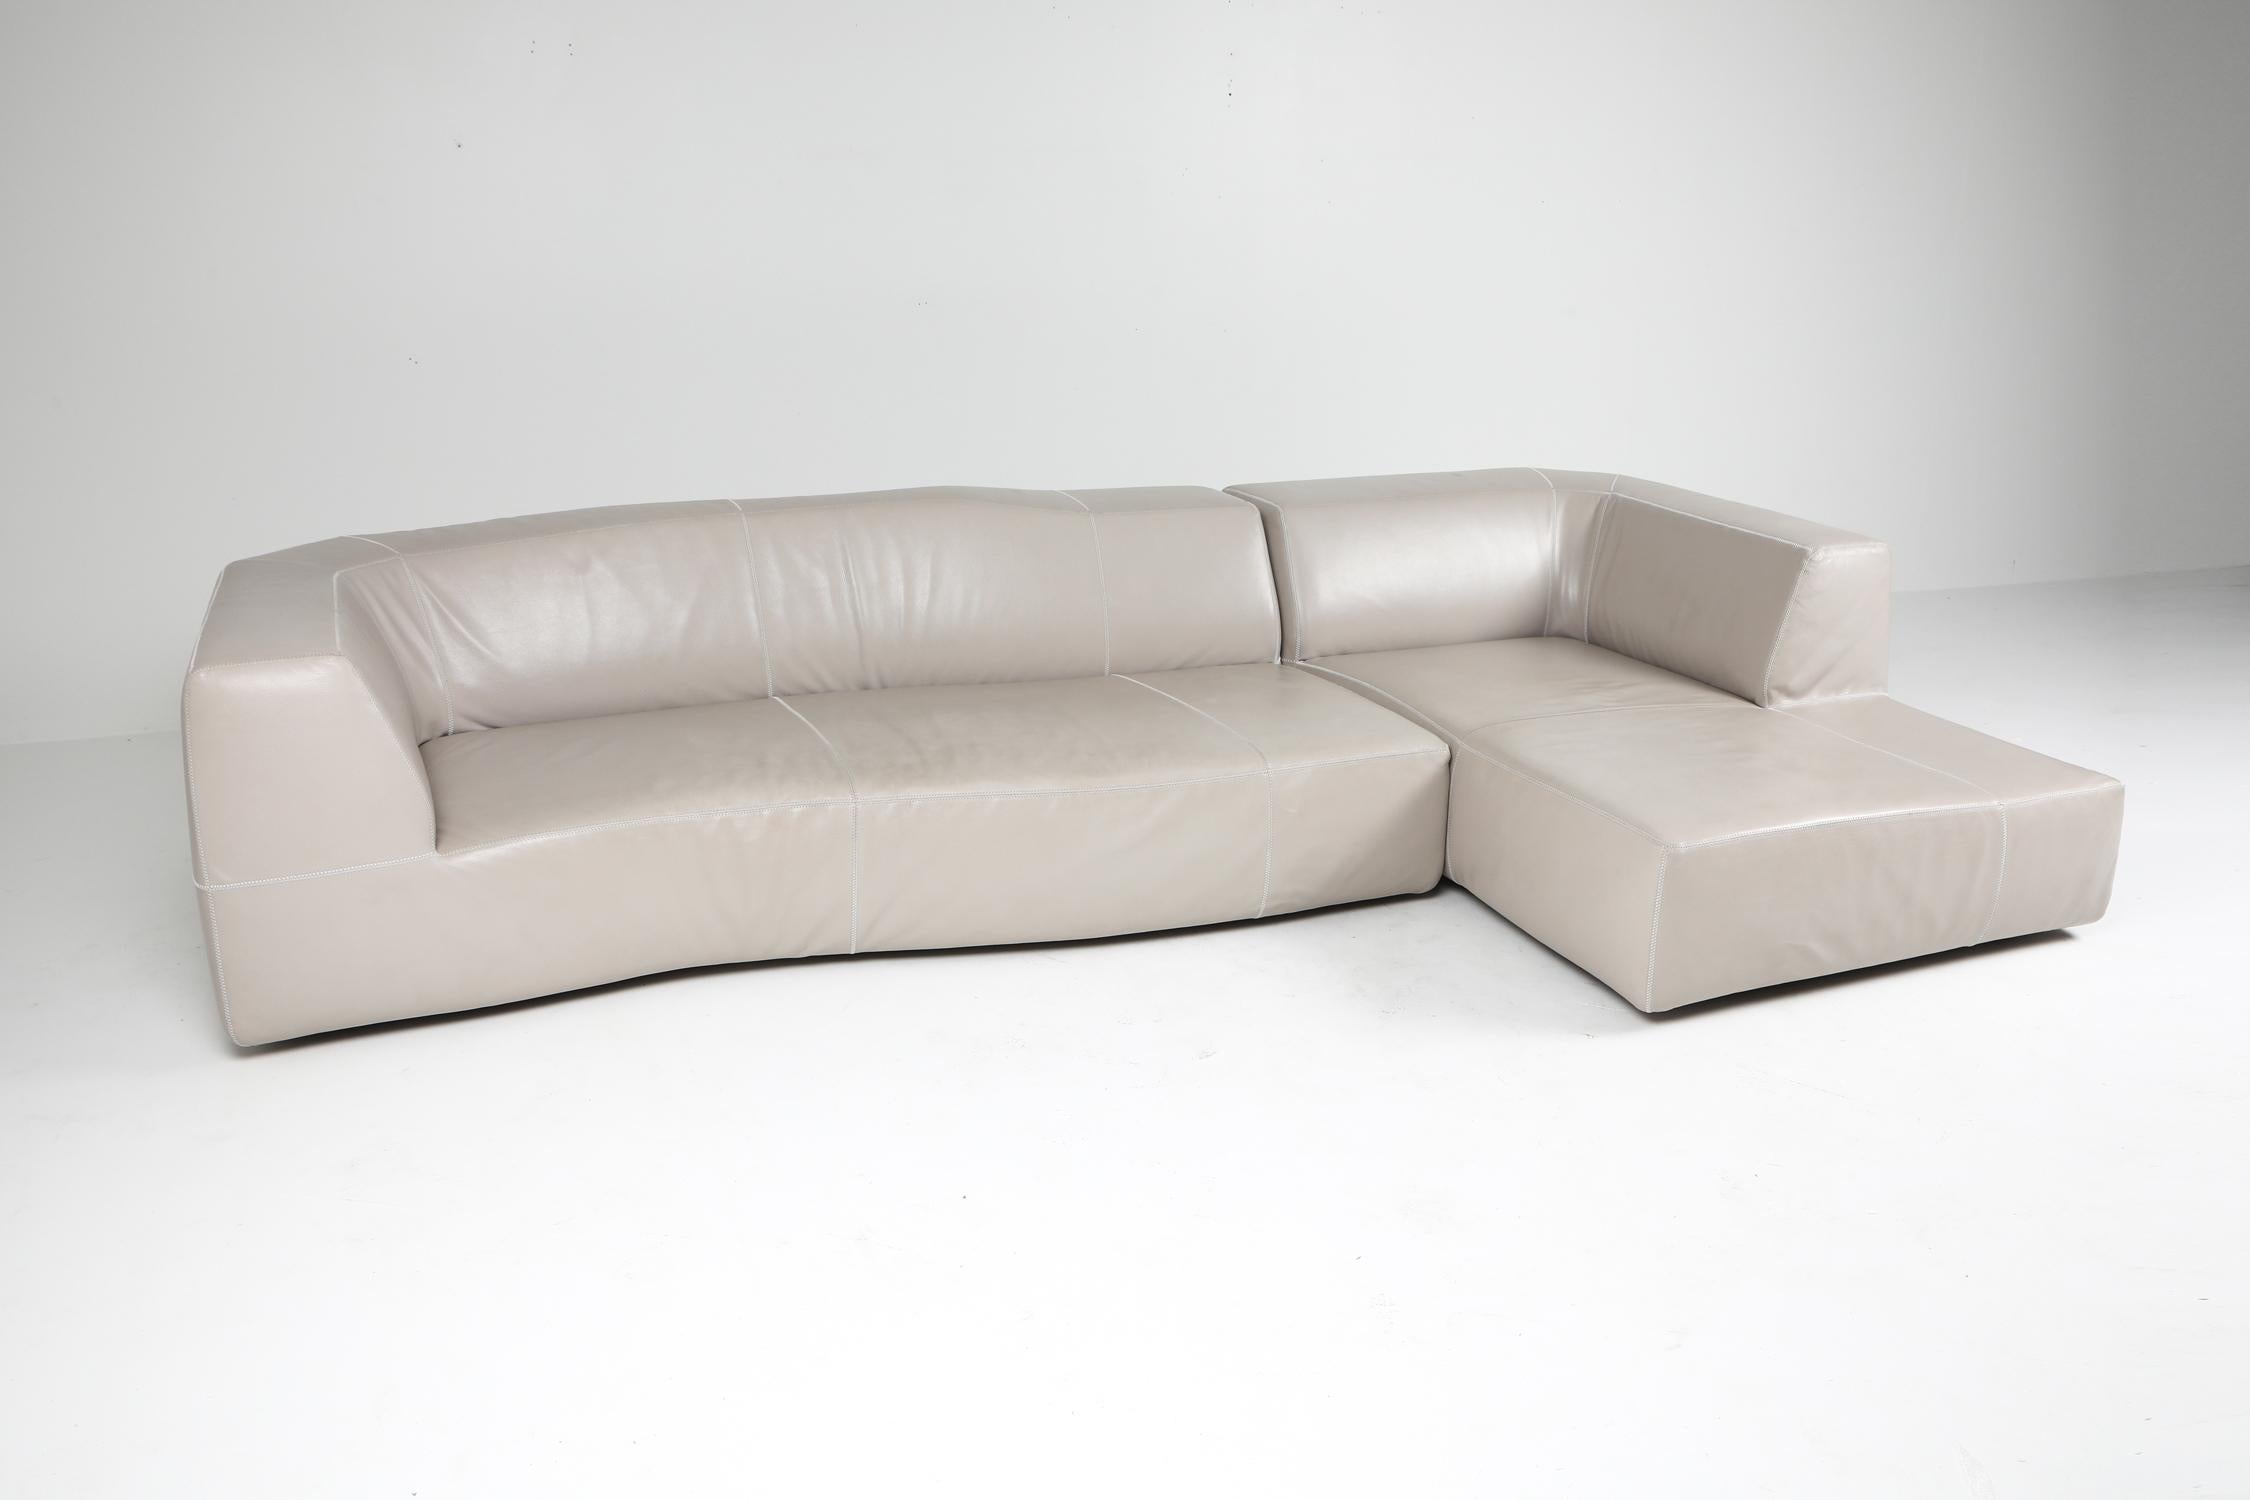 European B&B Italia sectional couch 'Bend' by Patricia Urquiola